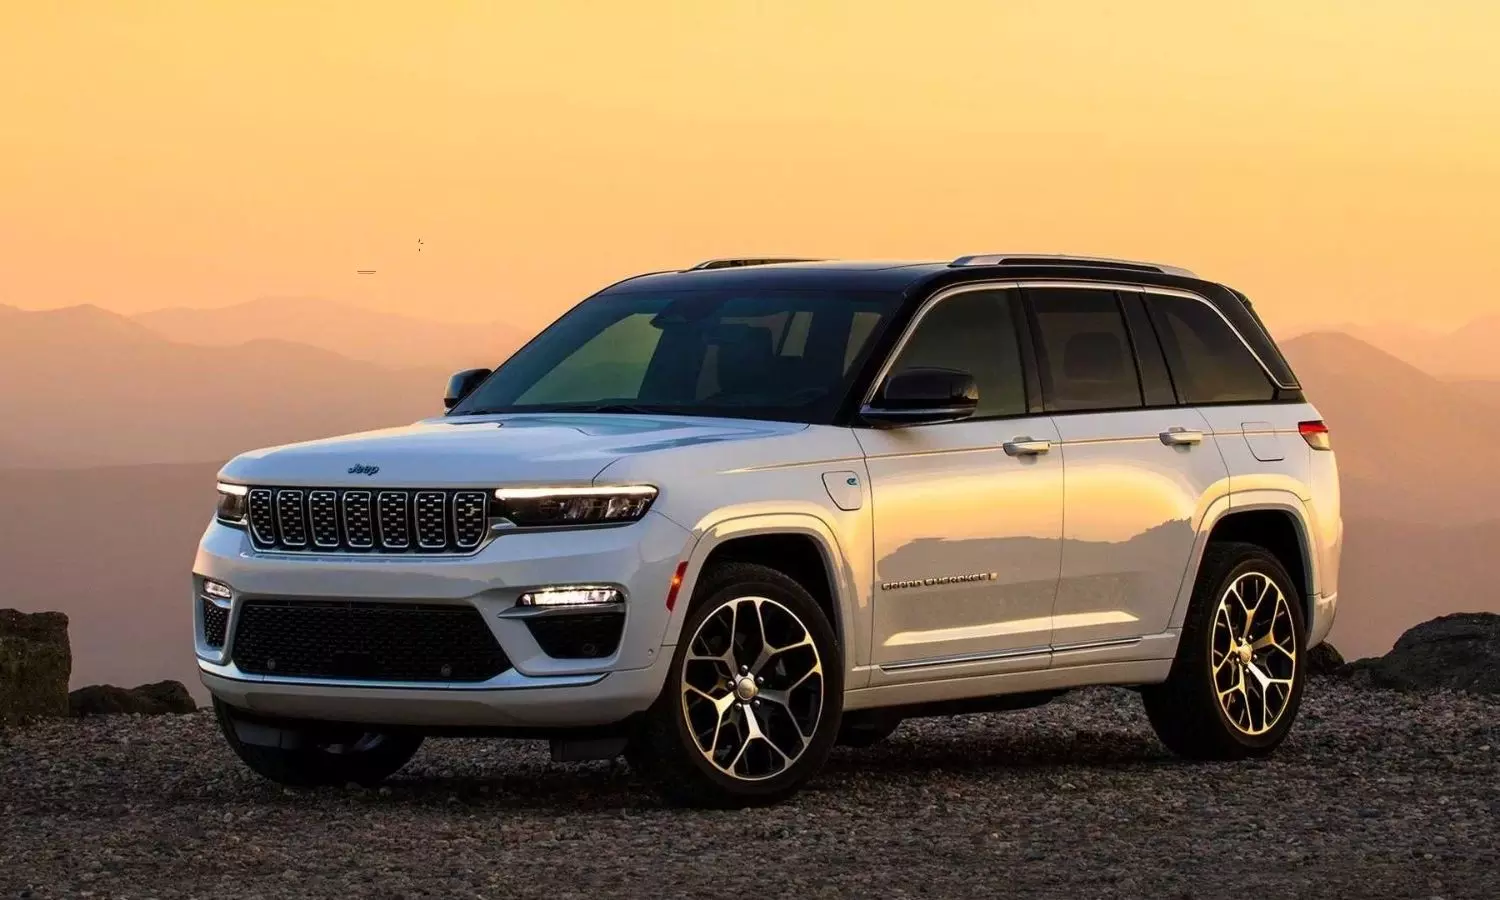 2022 jeep grand cherokee discount rs 12 lakhs check price and features